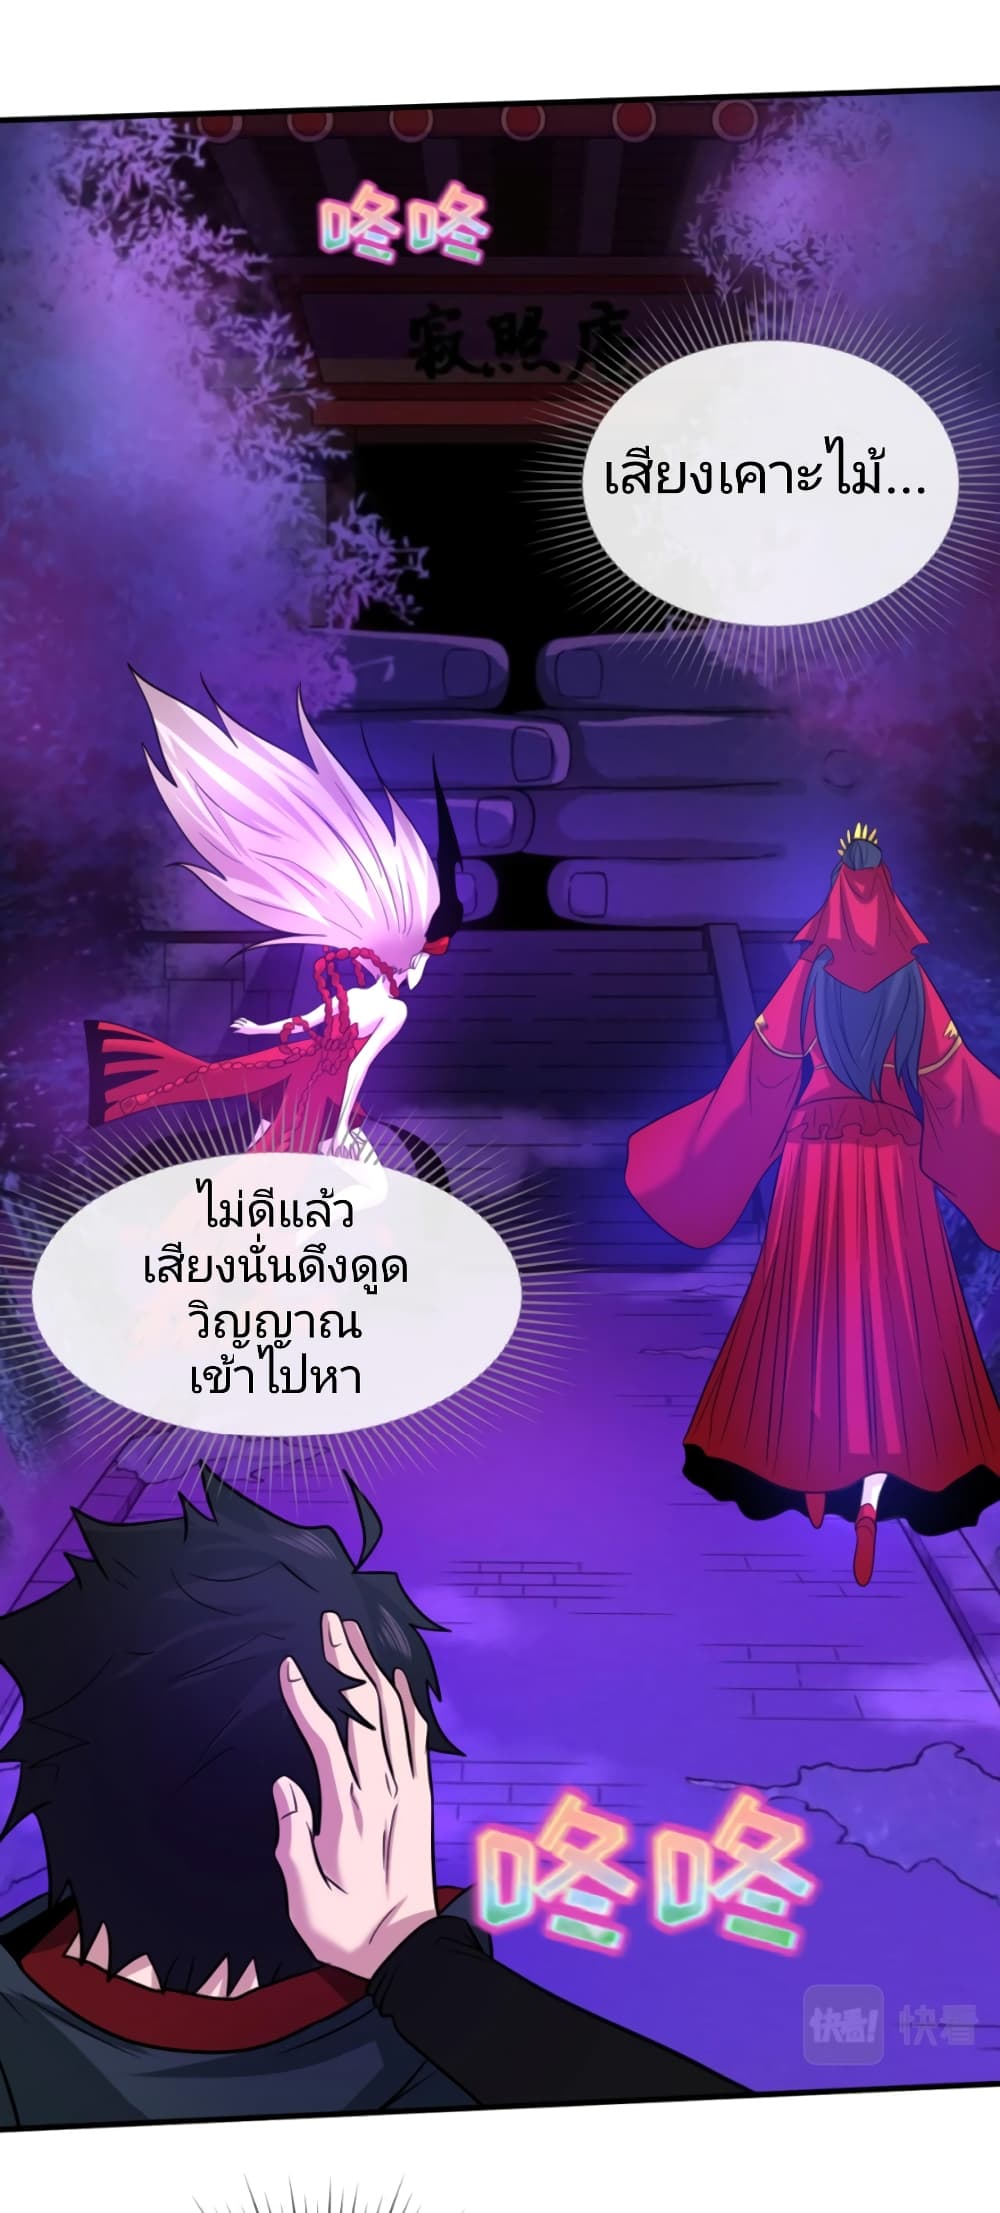 The Age of Ghost Spirits à¸à¸­à¸à¸à¸µà¹ 43 (20)